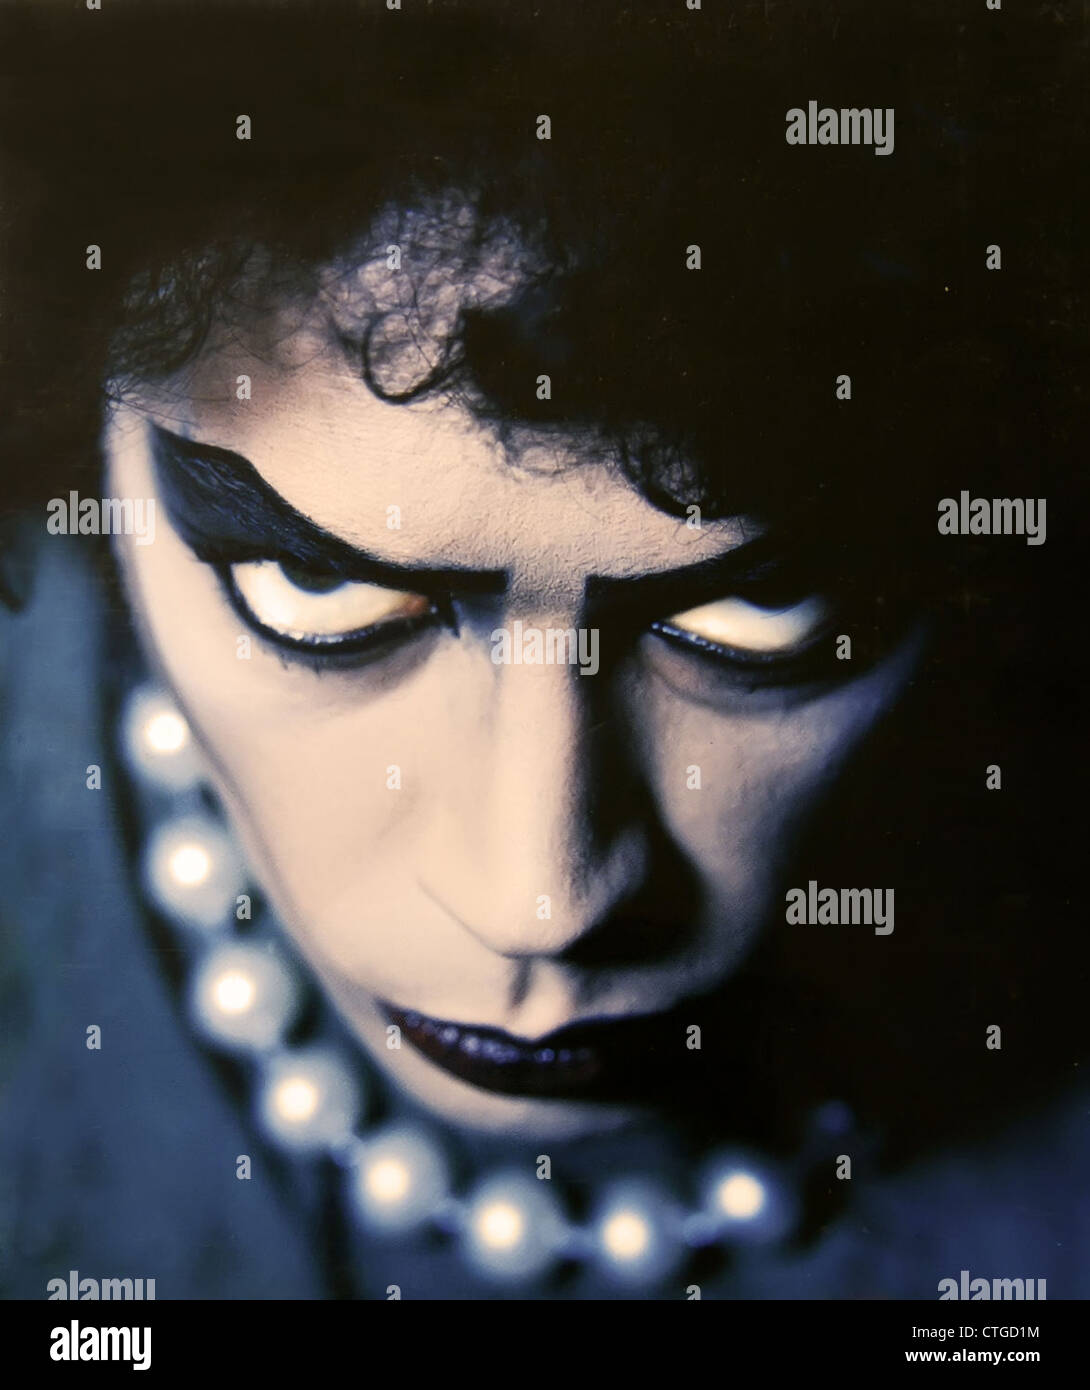 THE ROCKY HORROR PICTURE SHOW (1975) TIM CURRY, JIM SHARMAN (DIR) 026 MOVIESTORE COLLECTION LTD Stock Photo